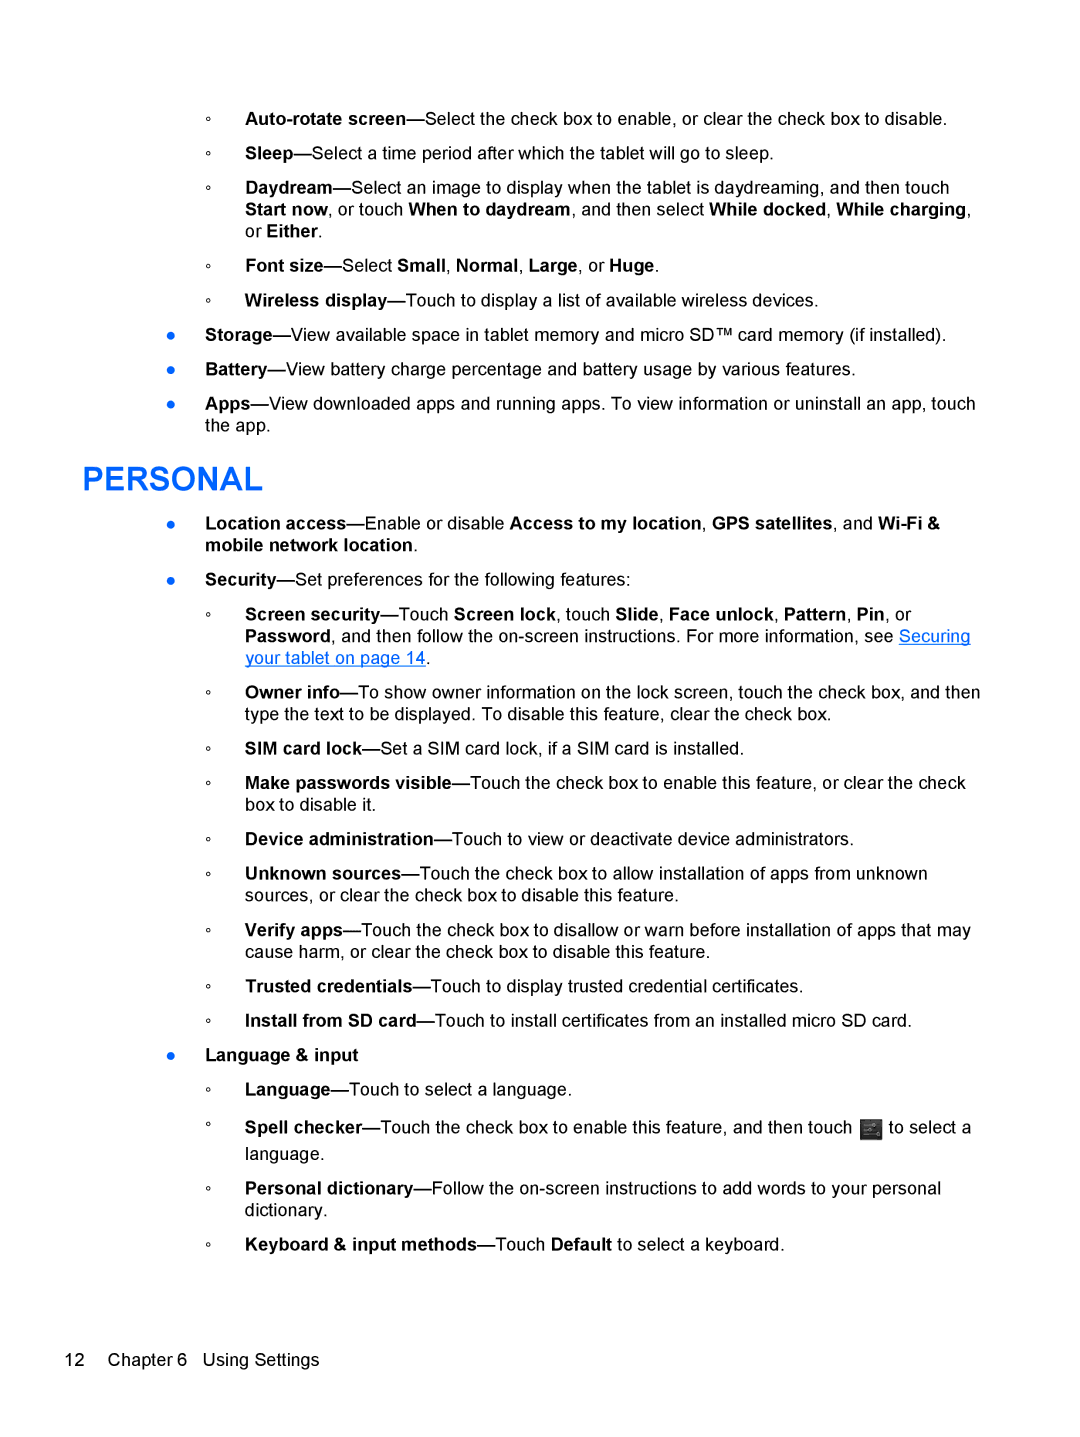 HP 6 VoiceTab II manual Font size-SelectSmall, Normal, Large, or Huge, Language & input 